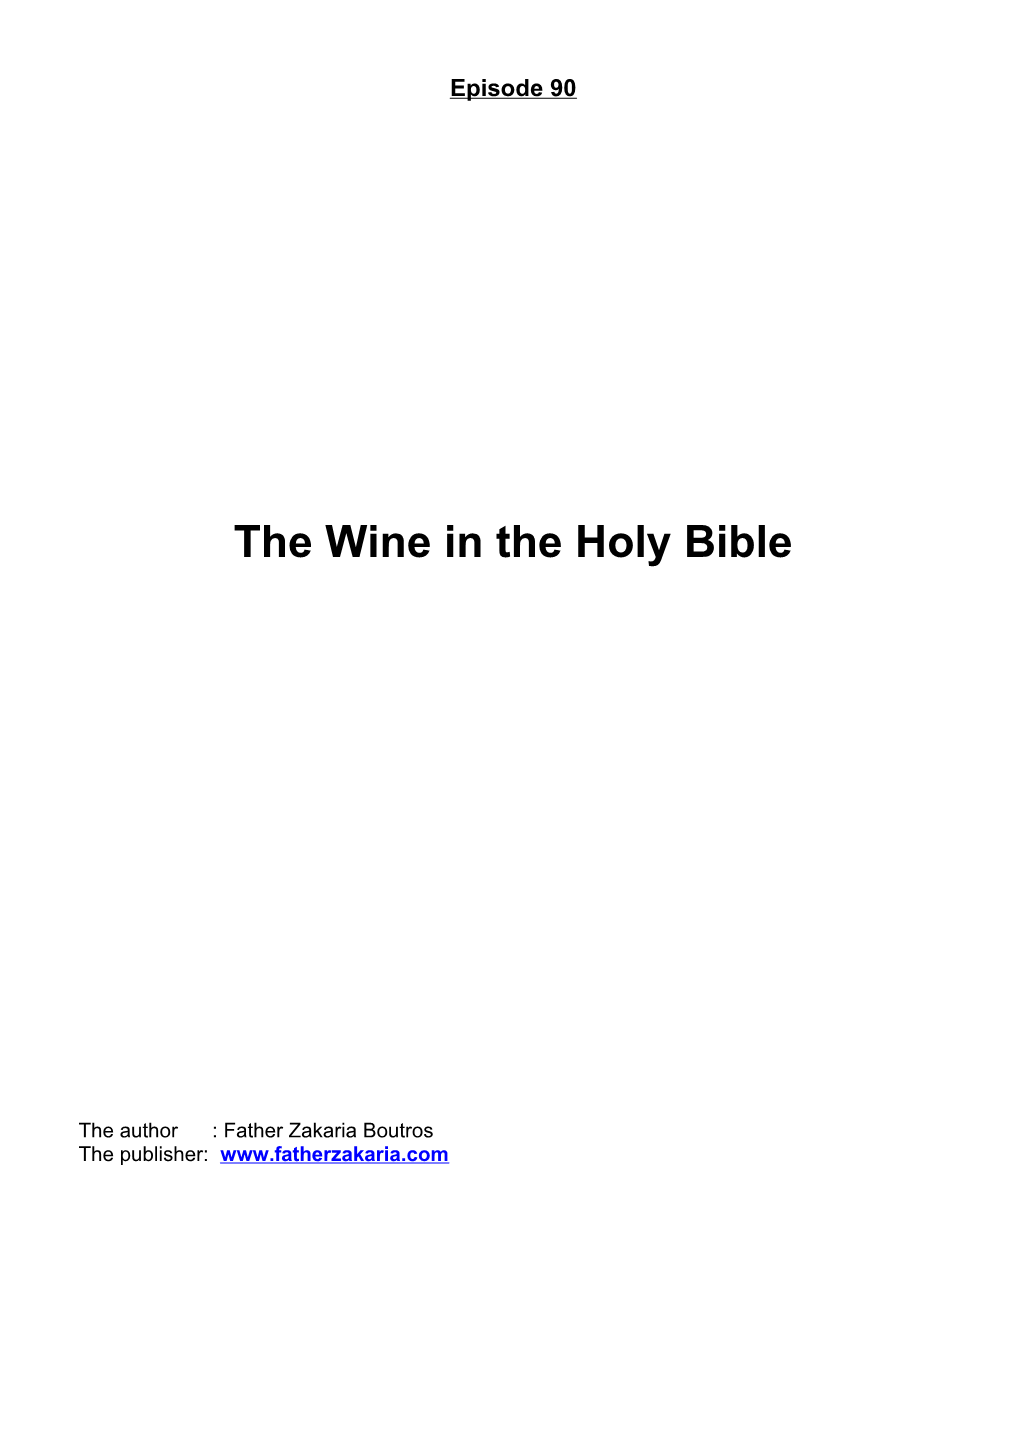 The Wine in the Holy Bible